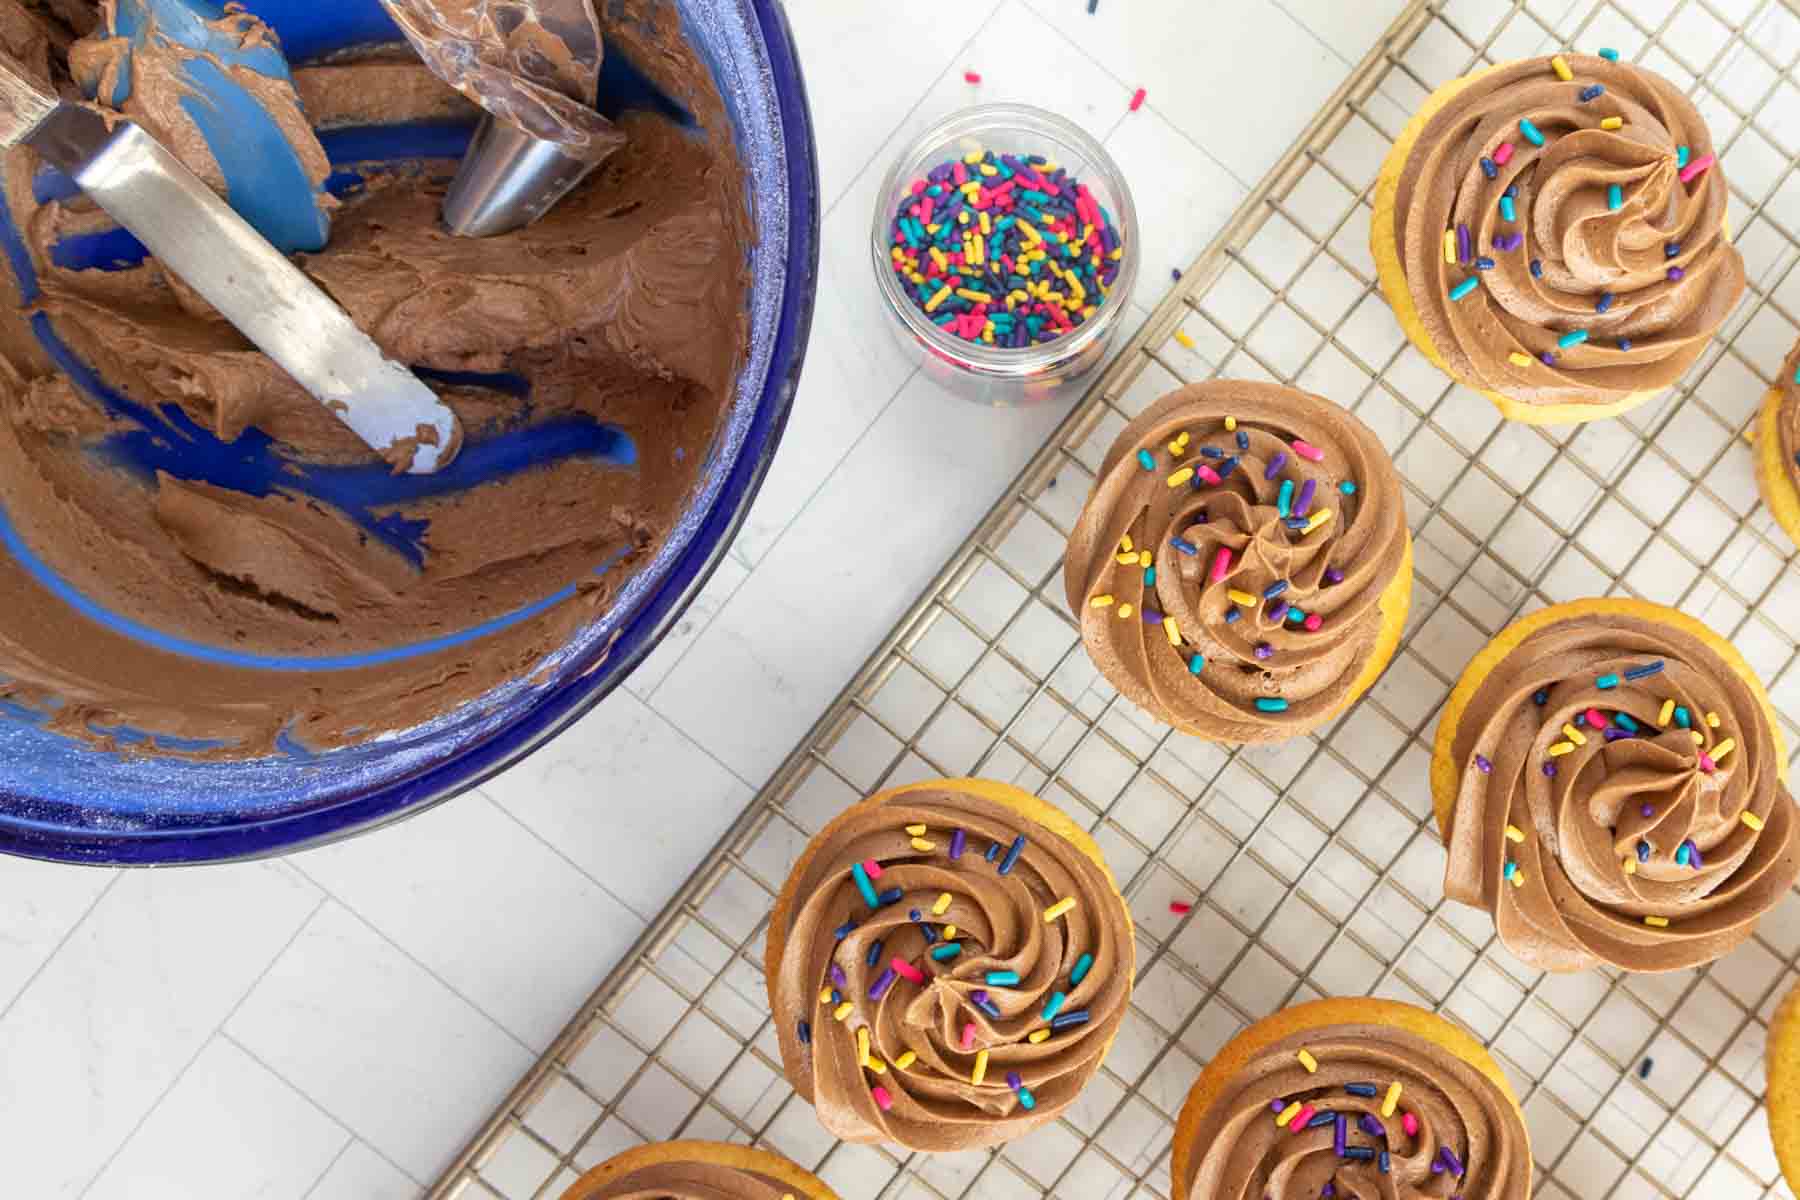 Cupcakes topped with chocolate frosting and colorful sprinkles rest on a cooling rack next to a bowl of leftover frosting and a small container of sprinkles.